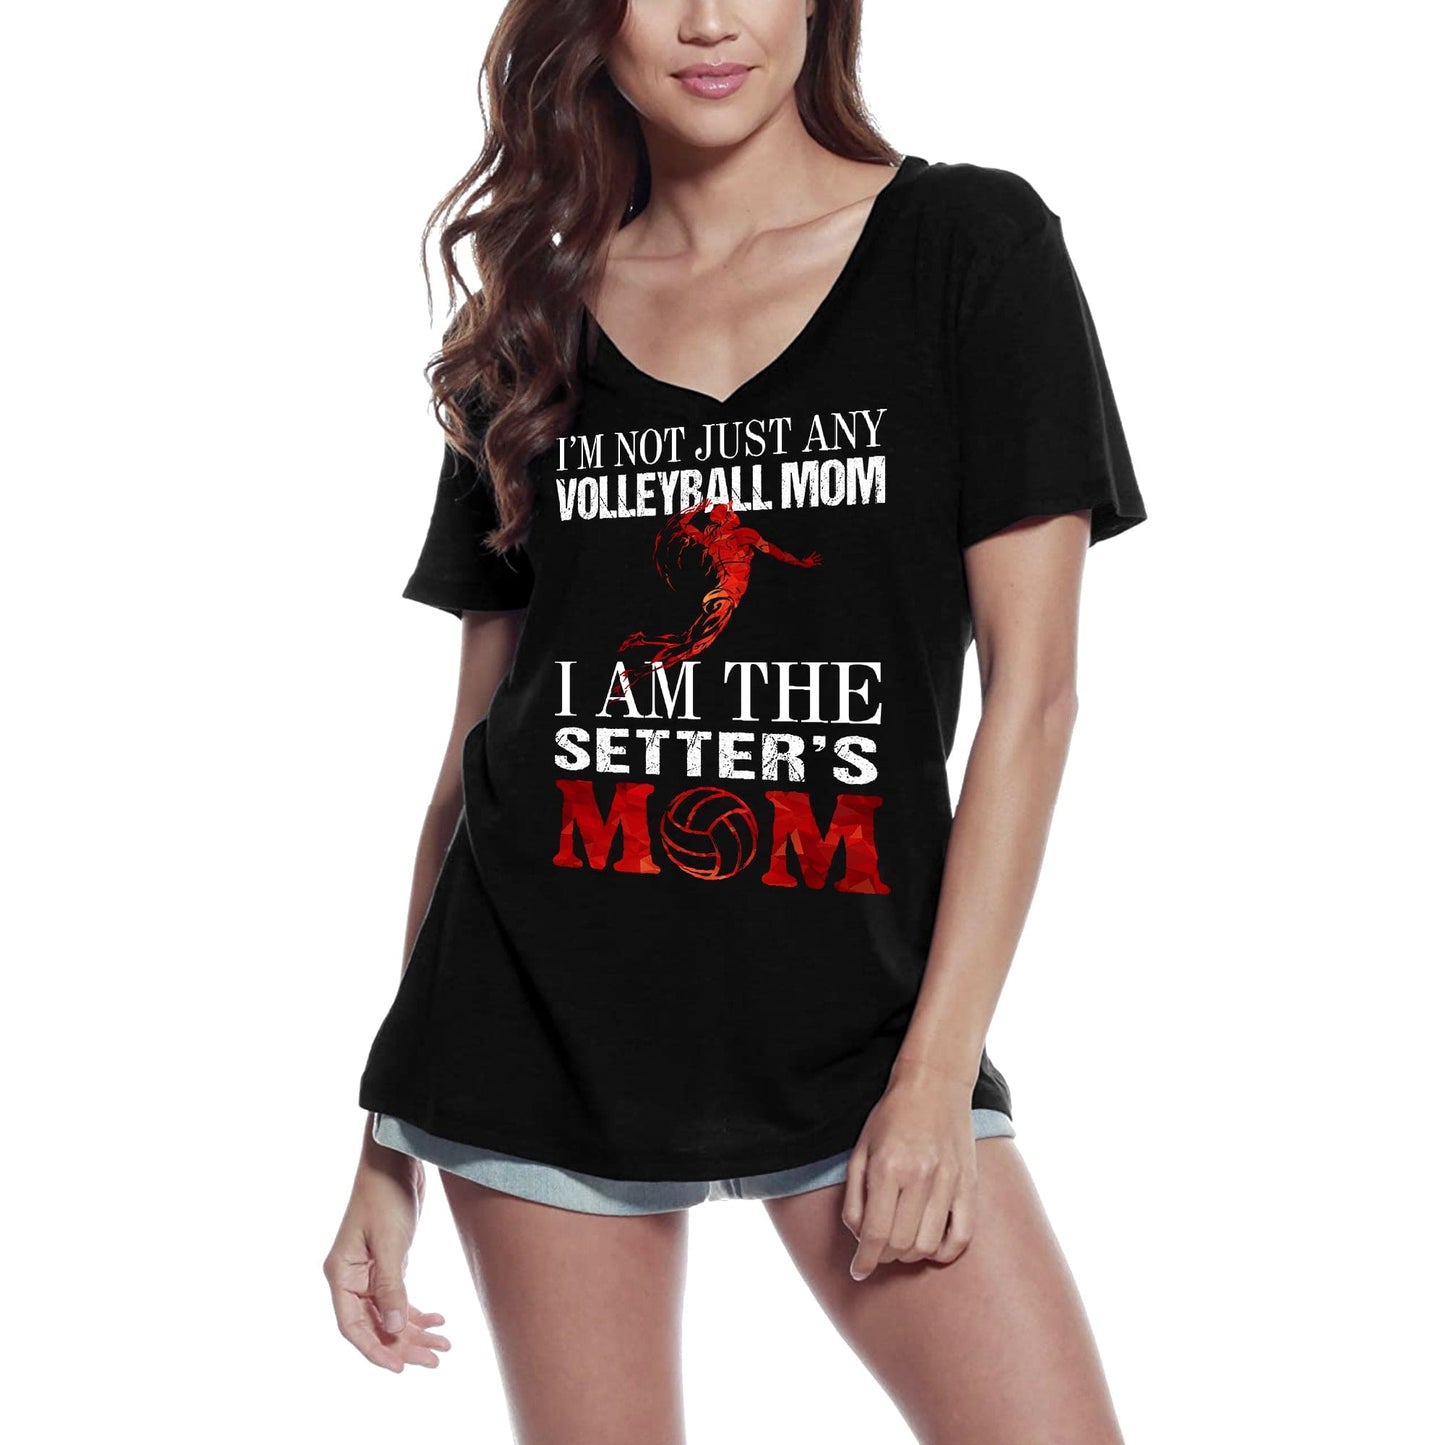 ULTRABASIC Women's T-Shirt I'm Not Just Any Volleyball Mom I'm the Setter's Mom